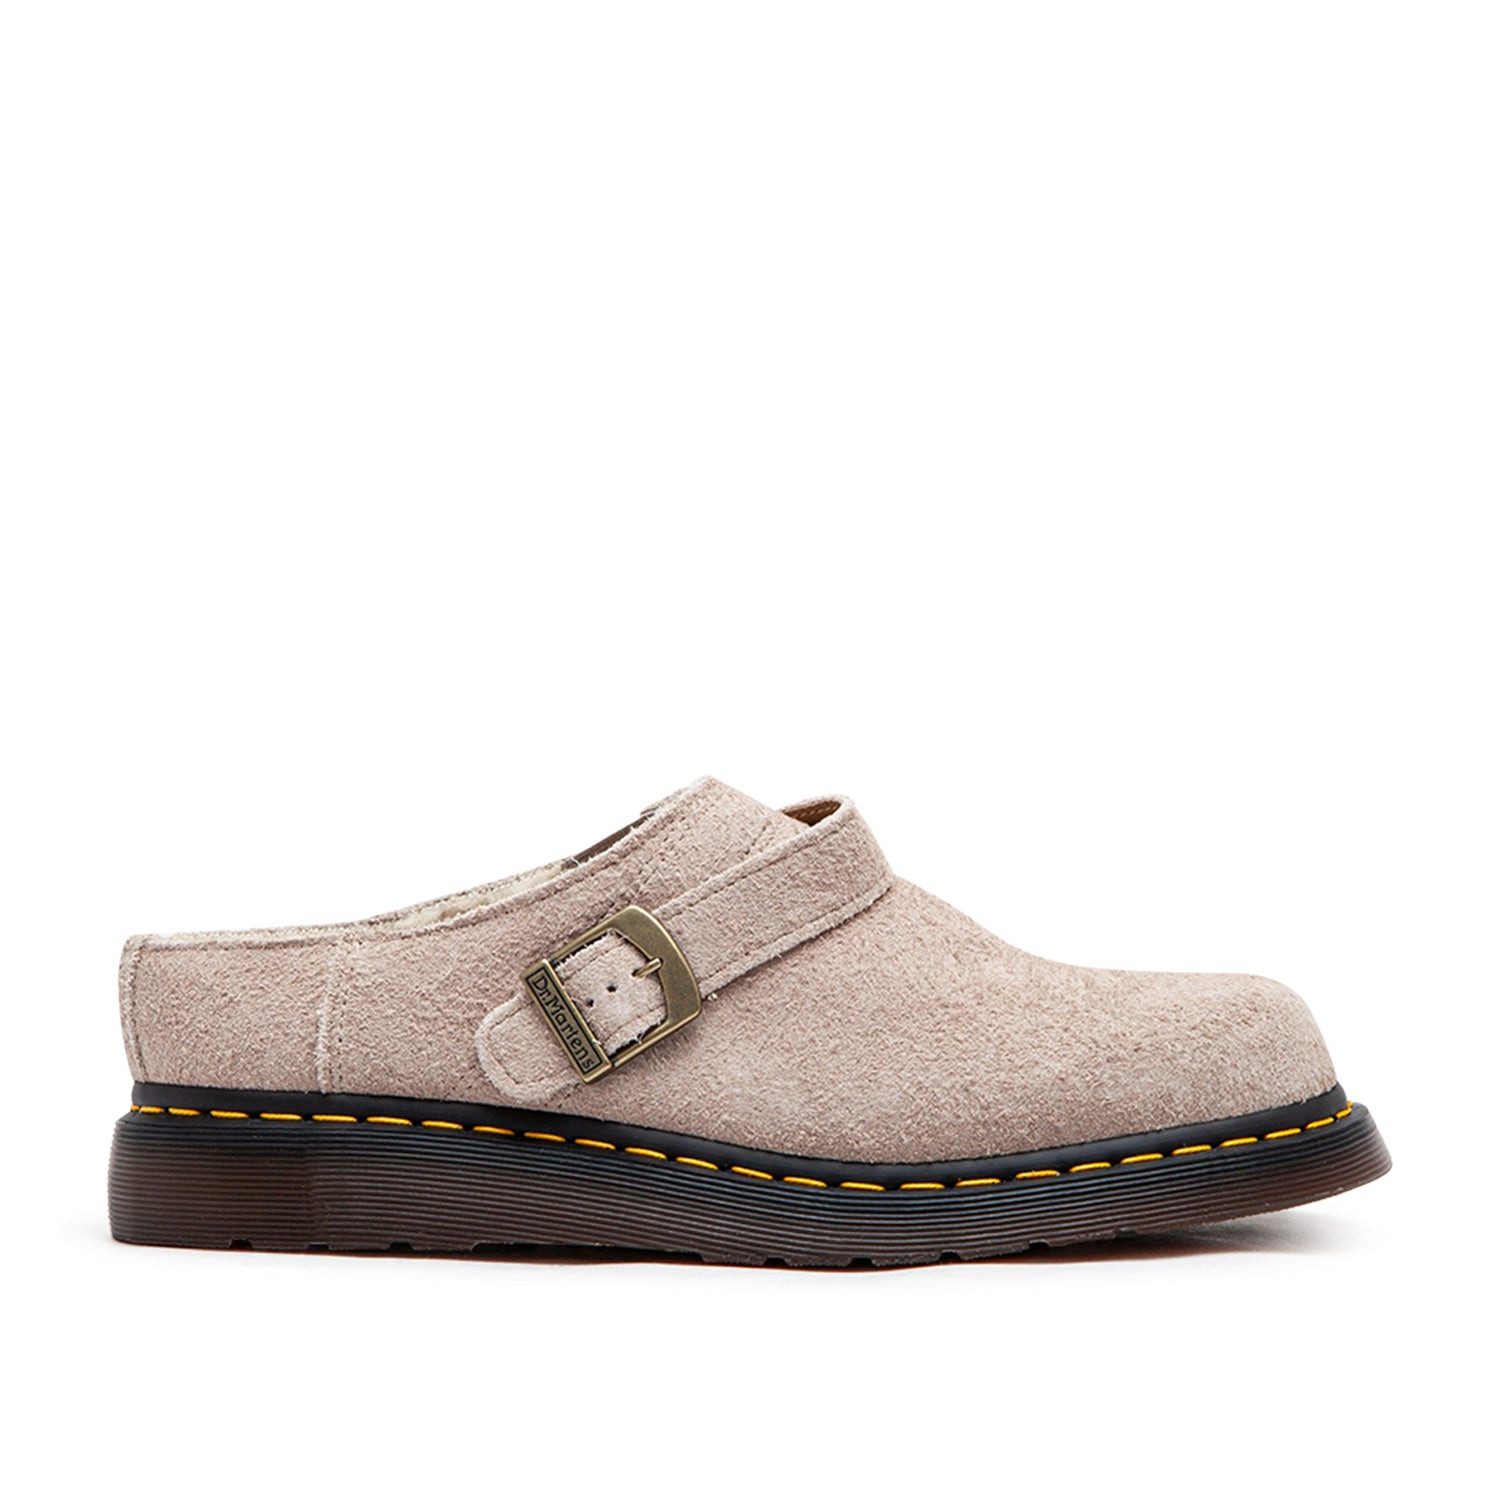 DR. MARTENS Dr. Martens Isham Faux Shearling Lined Suede Mules (Beige) Stiefel